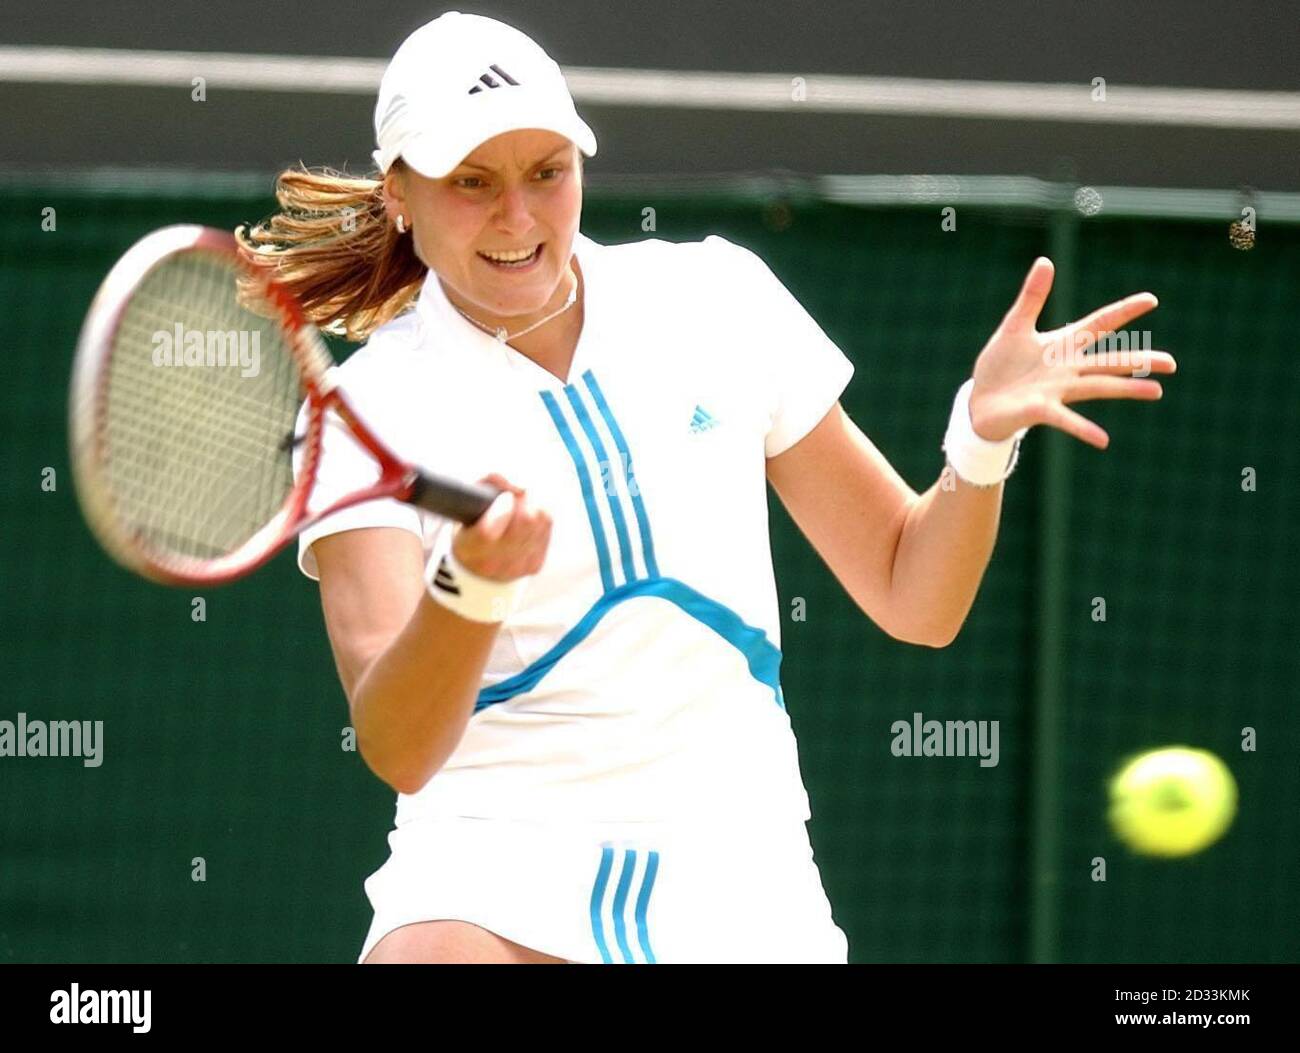 Nadia Petrova from Russia who lost to Jennifer Capriati from the USA in the fourth round of the Ladies Single tournament of The Lawn Tennis Championships at Wimbledon, London. Capriati won the match in straight sets 6:4/6:4. Stock Photo